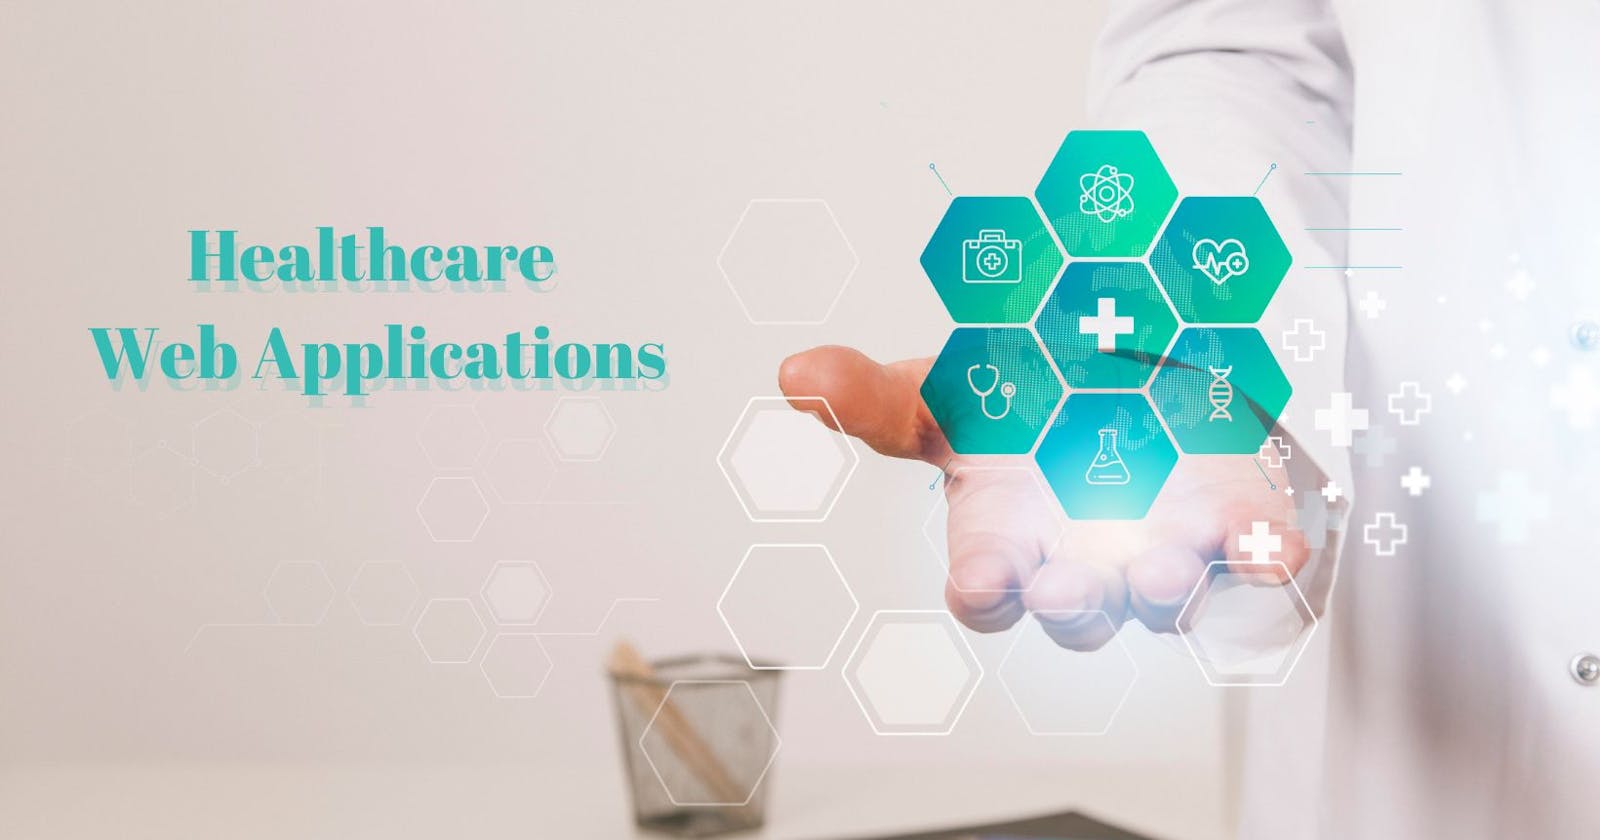 Healthcare Web Applications Development: A Guide for Decision Makers